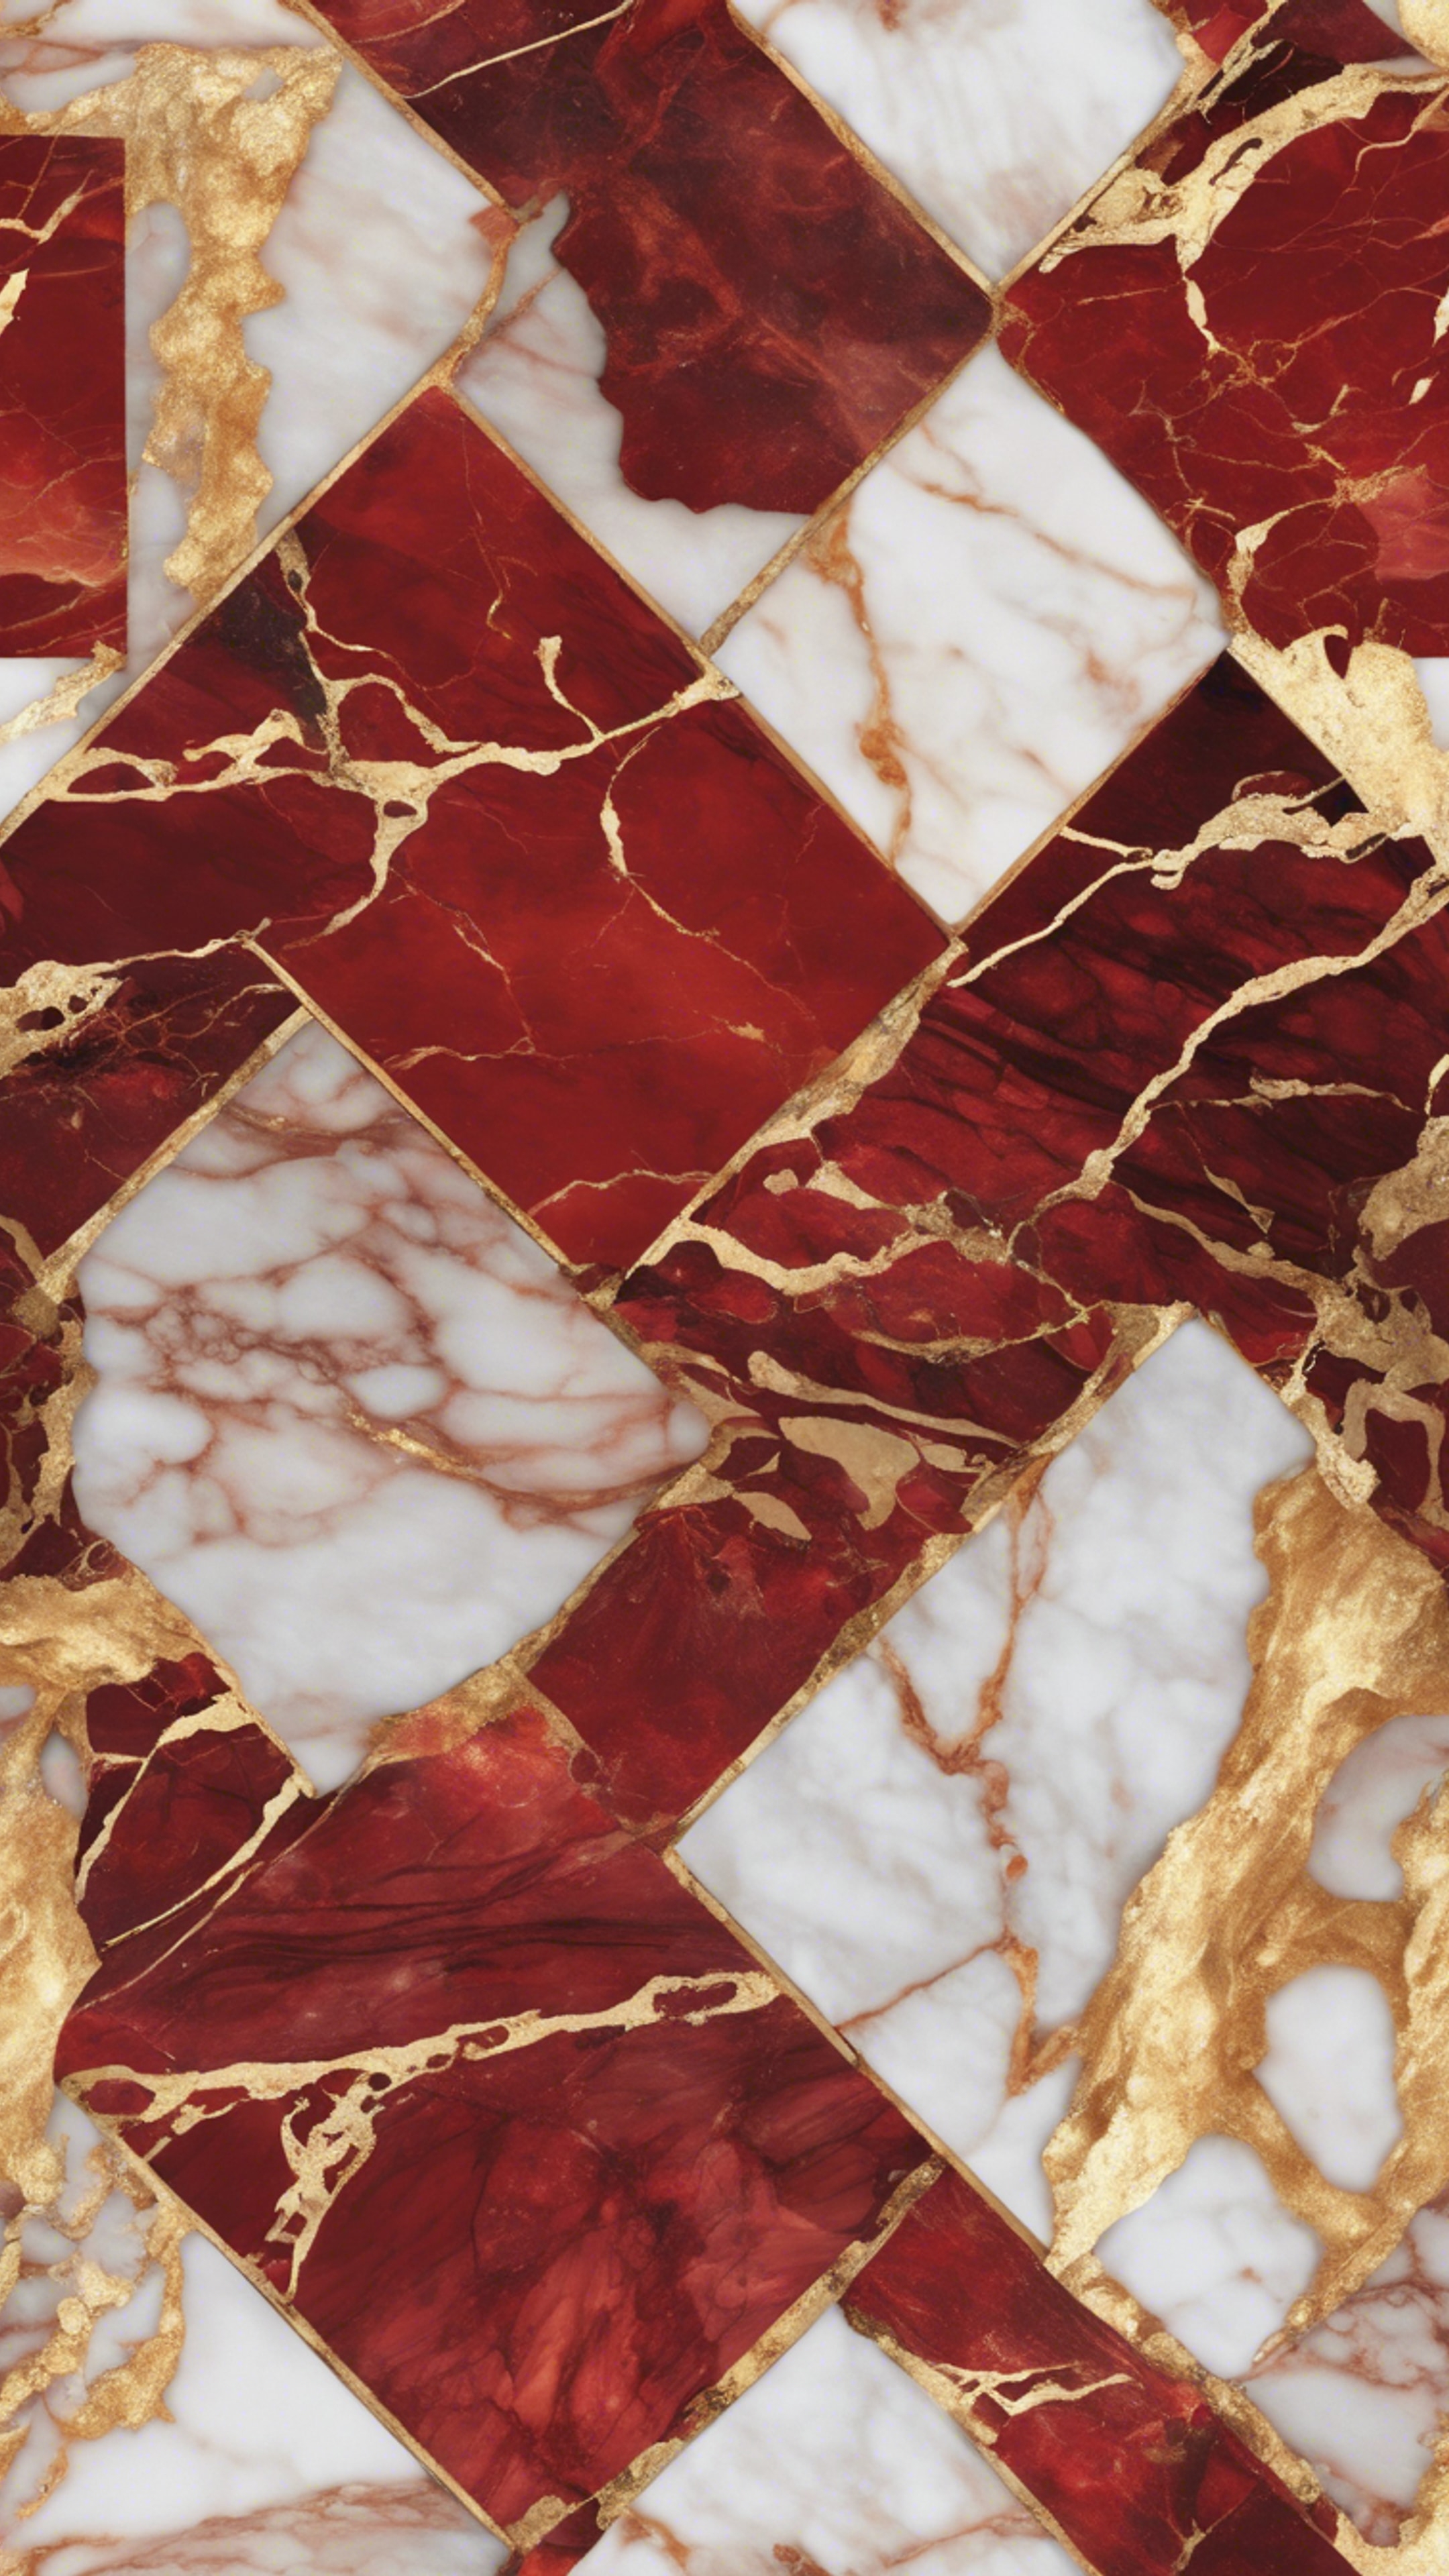 Seamless pattern of red and gold marble resembling the interior of an opulent mansion. Kertas dinding[0c55d253d85d467eb81b]